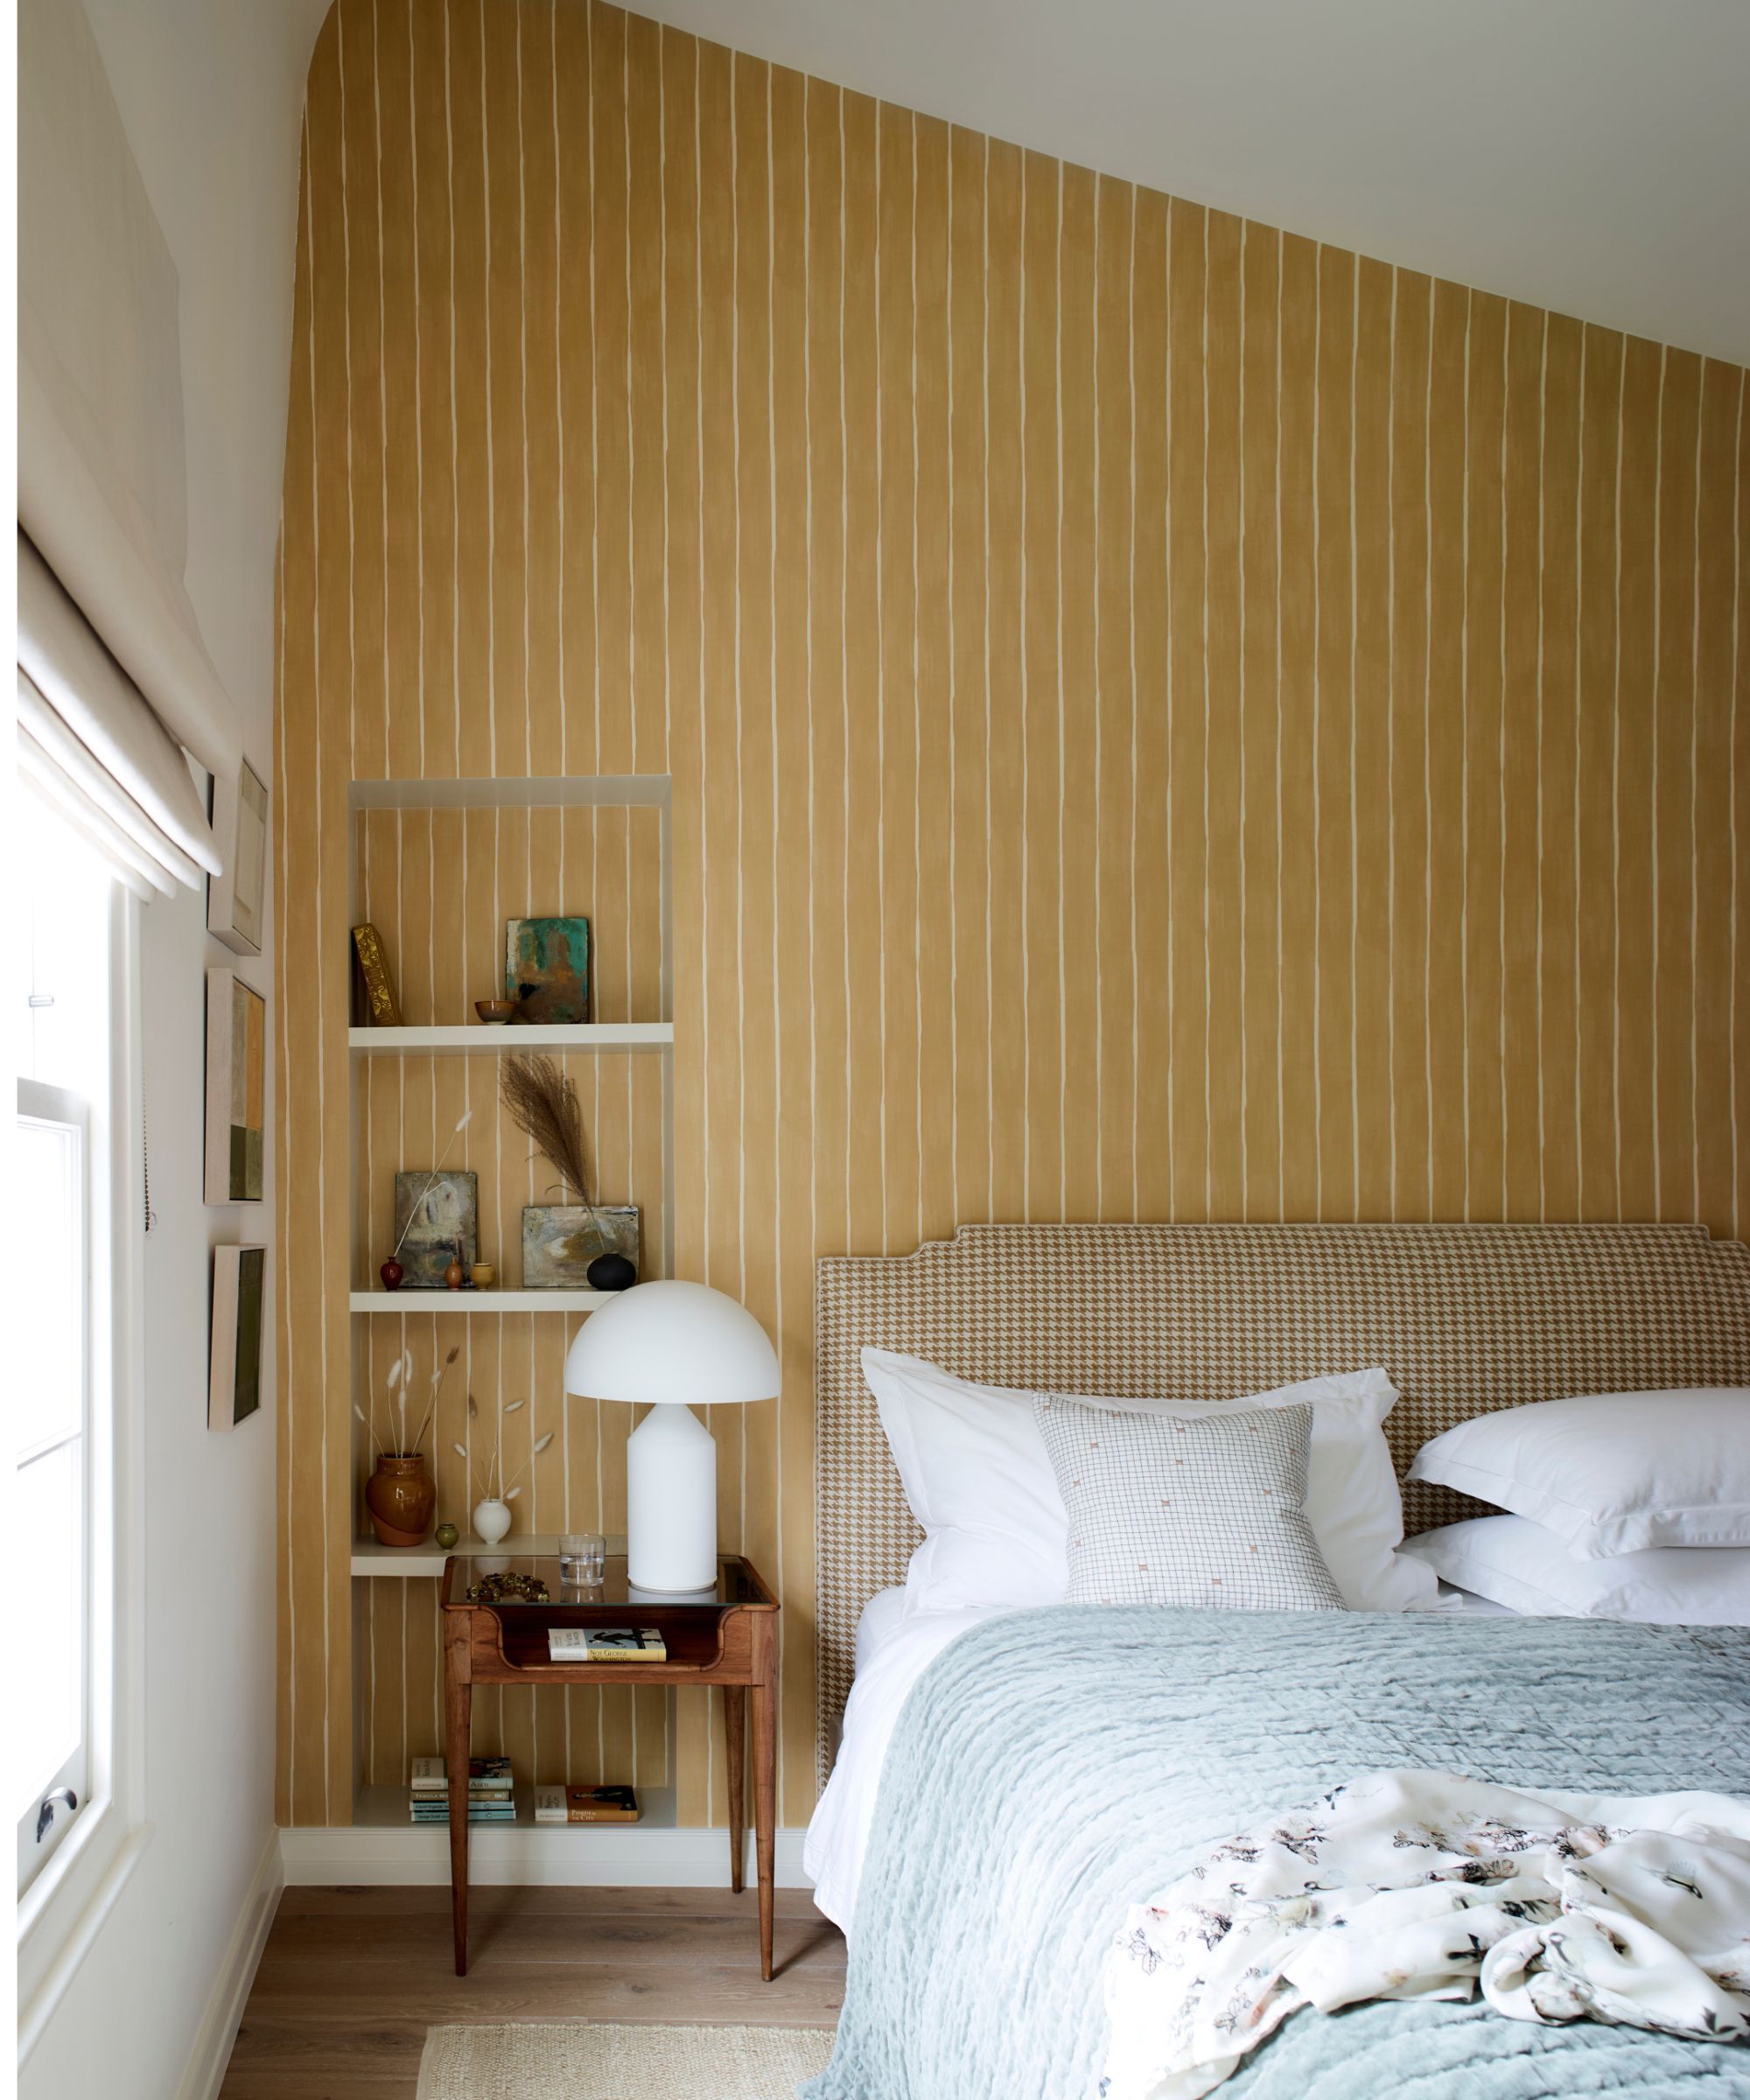 Bedroom with subtle striped yellow wallpaper